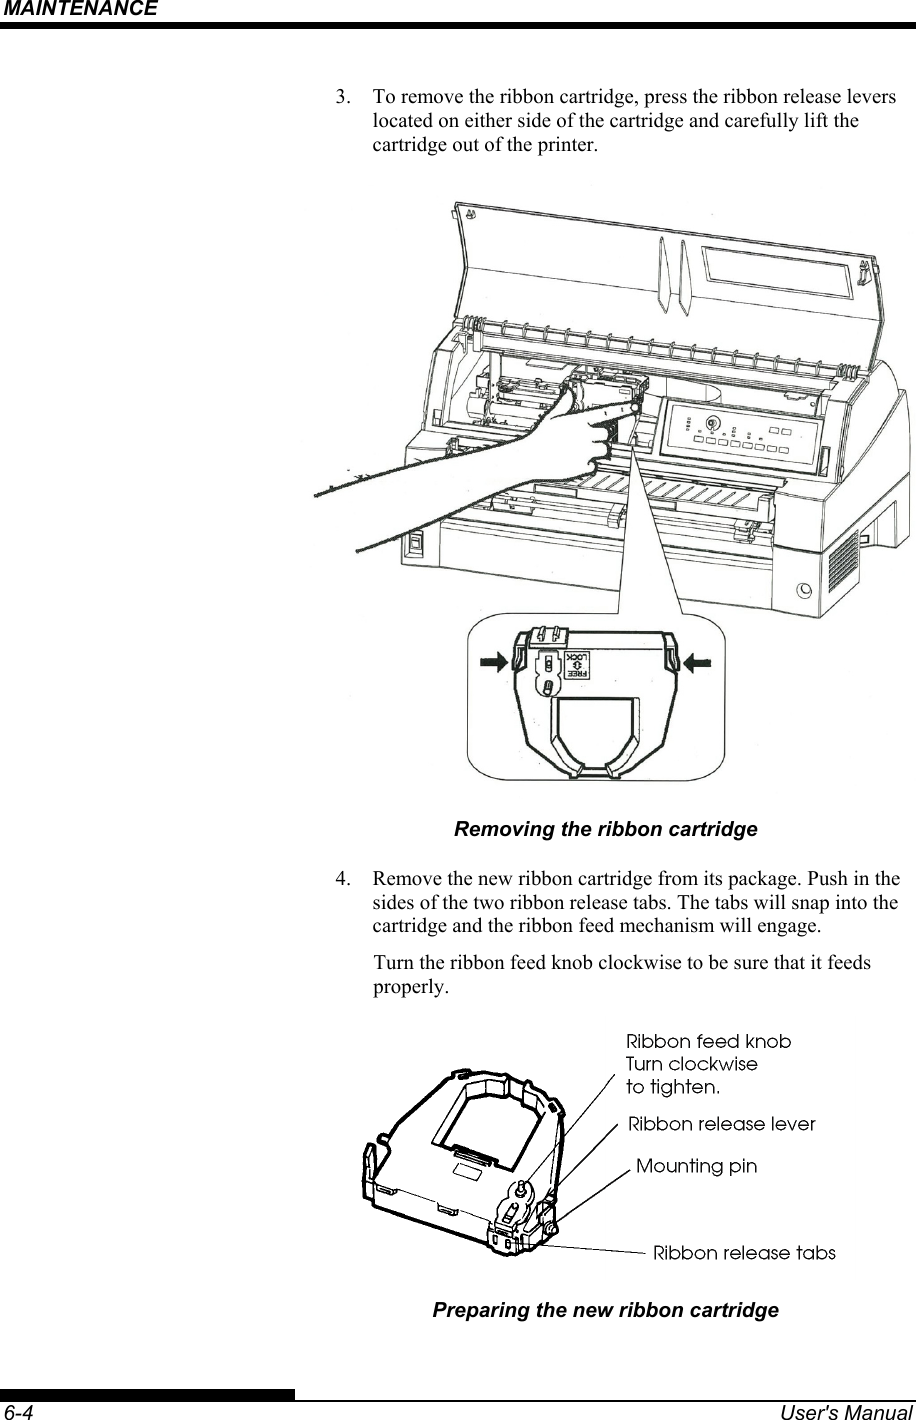 MAINTENANCE    6-4  User&apos;s Manual 3.  To remove the ribbon cartridge, press the ribbon release levers located on either side of the cartridge and carefully lift the cartridge out of the printer.  Removing the ribbon cartridge 4.  Remove the new ribbon cartridge from its package. Push in the sides of the two ribbon release tabs. The tabs will snap into the cartridge and the ribbon feed mechanism will engage. Turn the ribbon feed knob clockwise to be sure that it feeds properly.  Preparing the new ribbon cartridge 